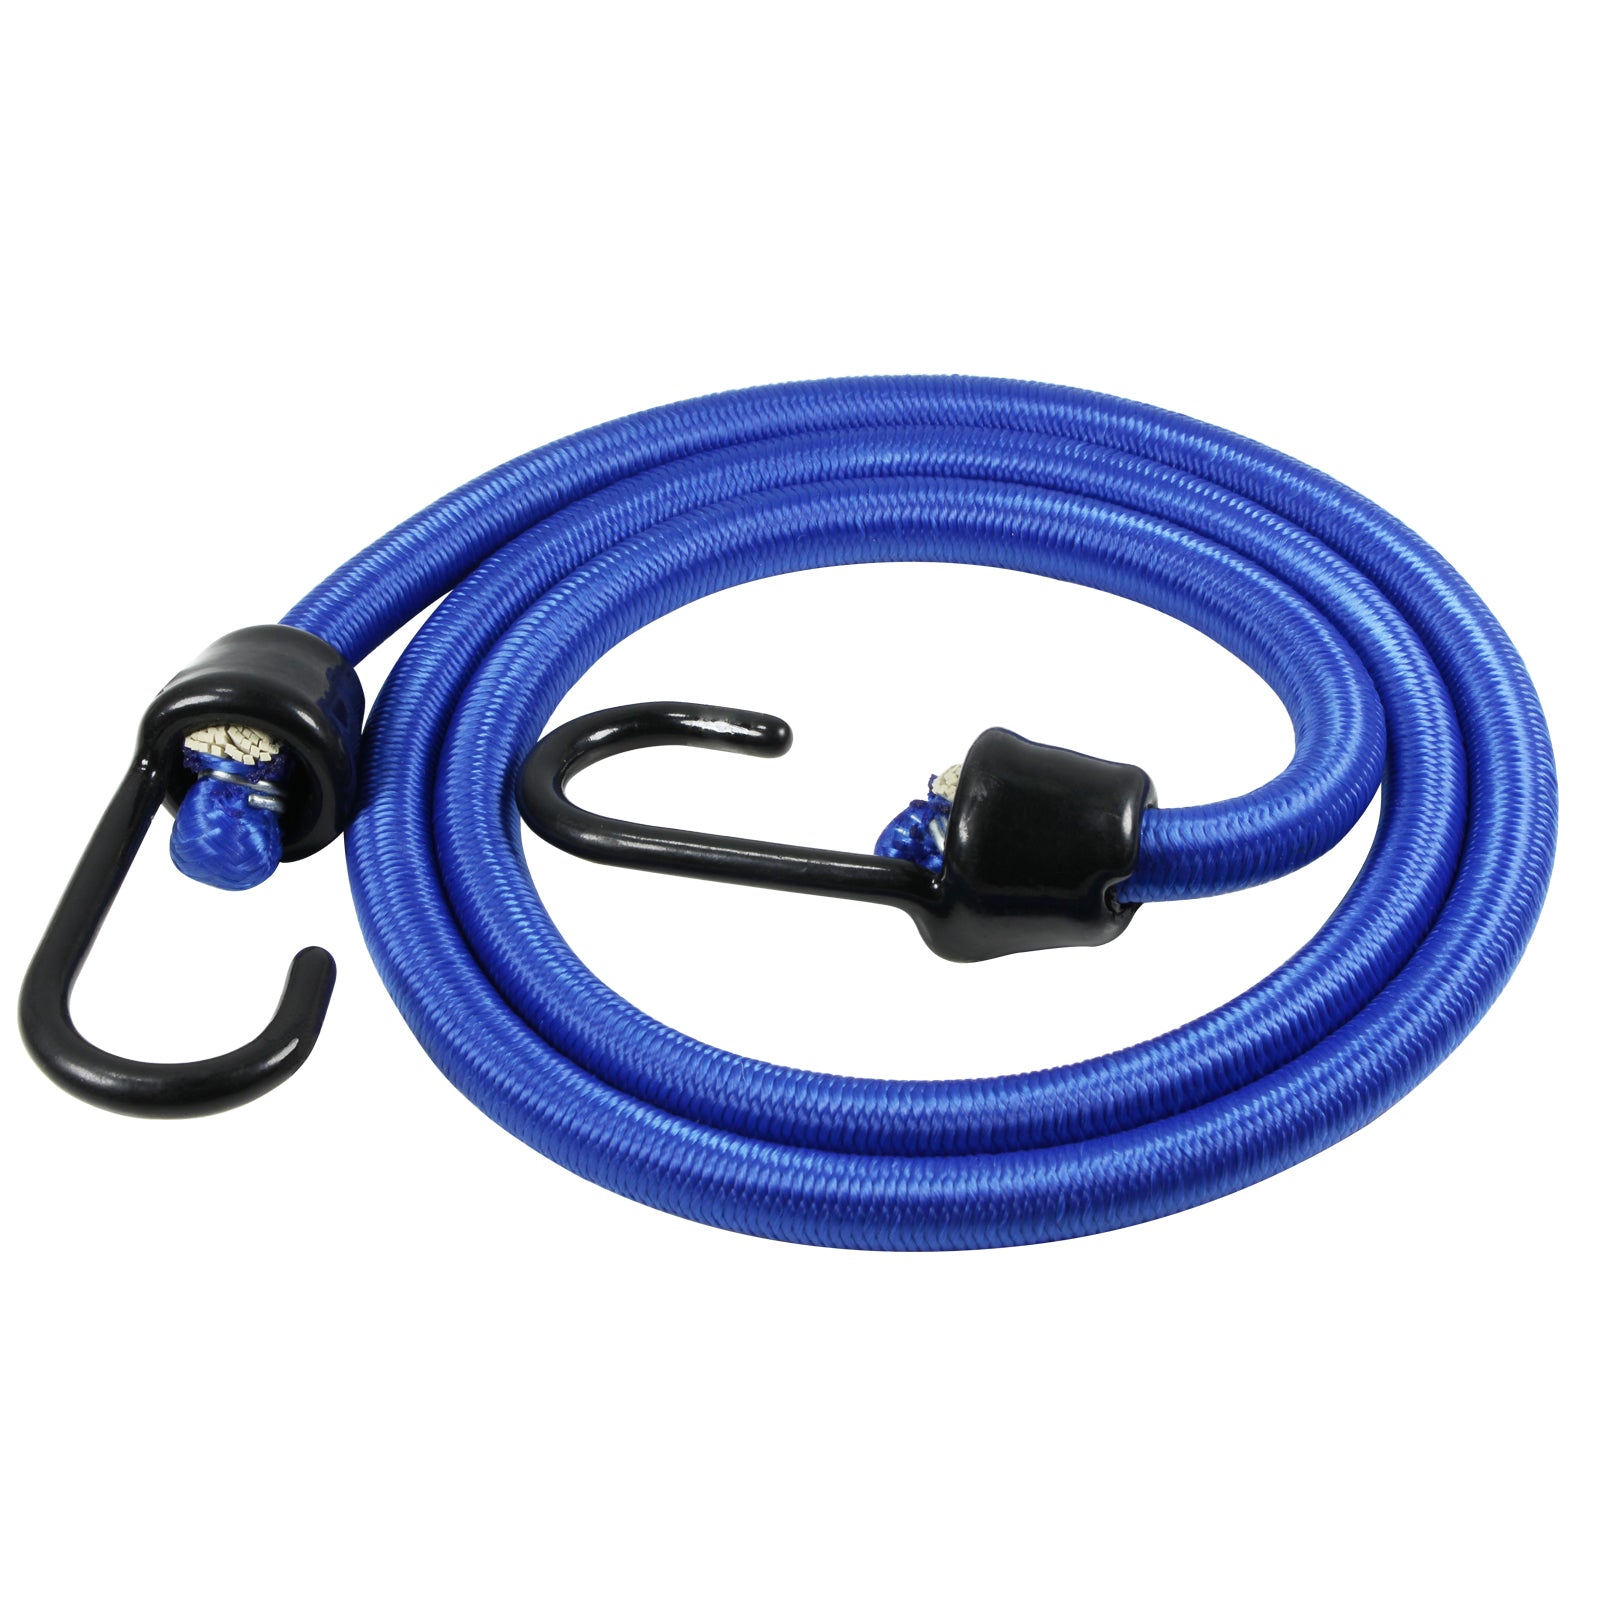 Olympia Heavy Duty Bungee Cord With Carabiner Hook 10mm x 800mm Blue